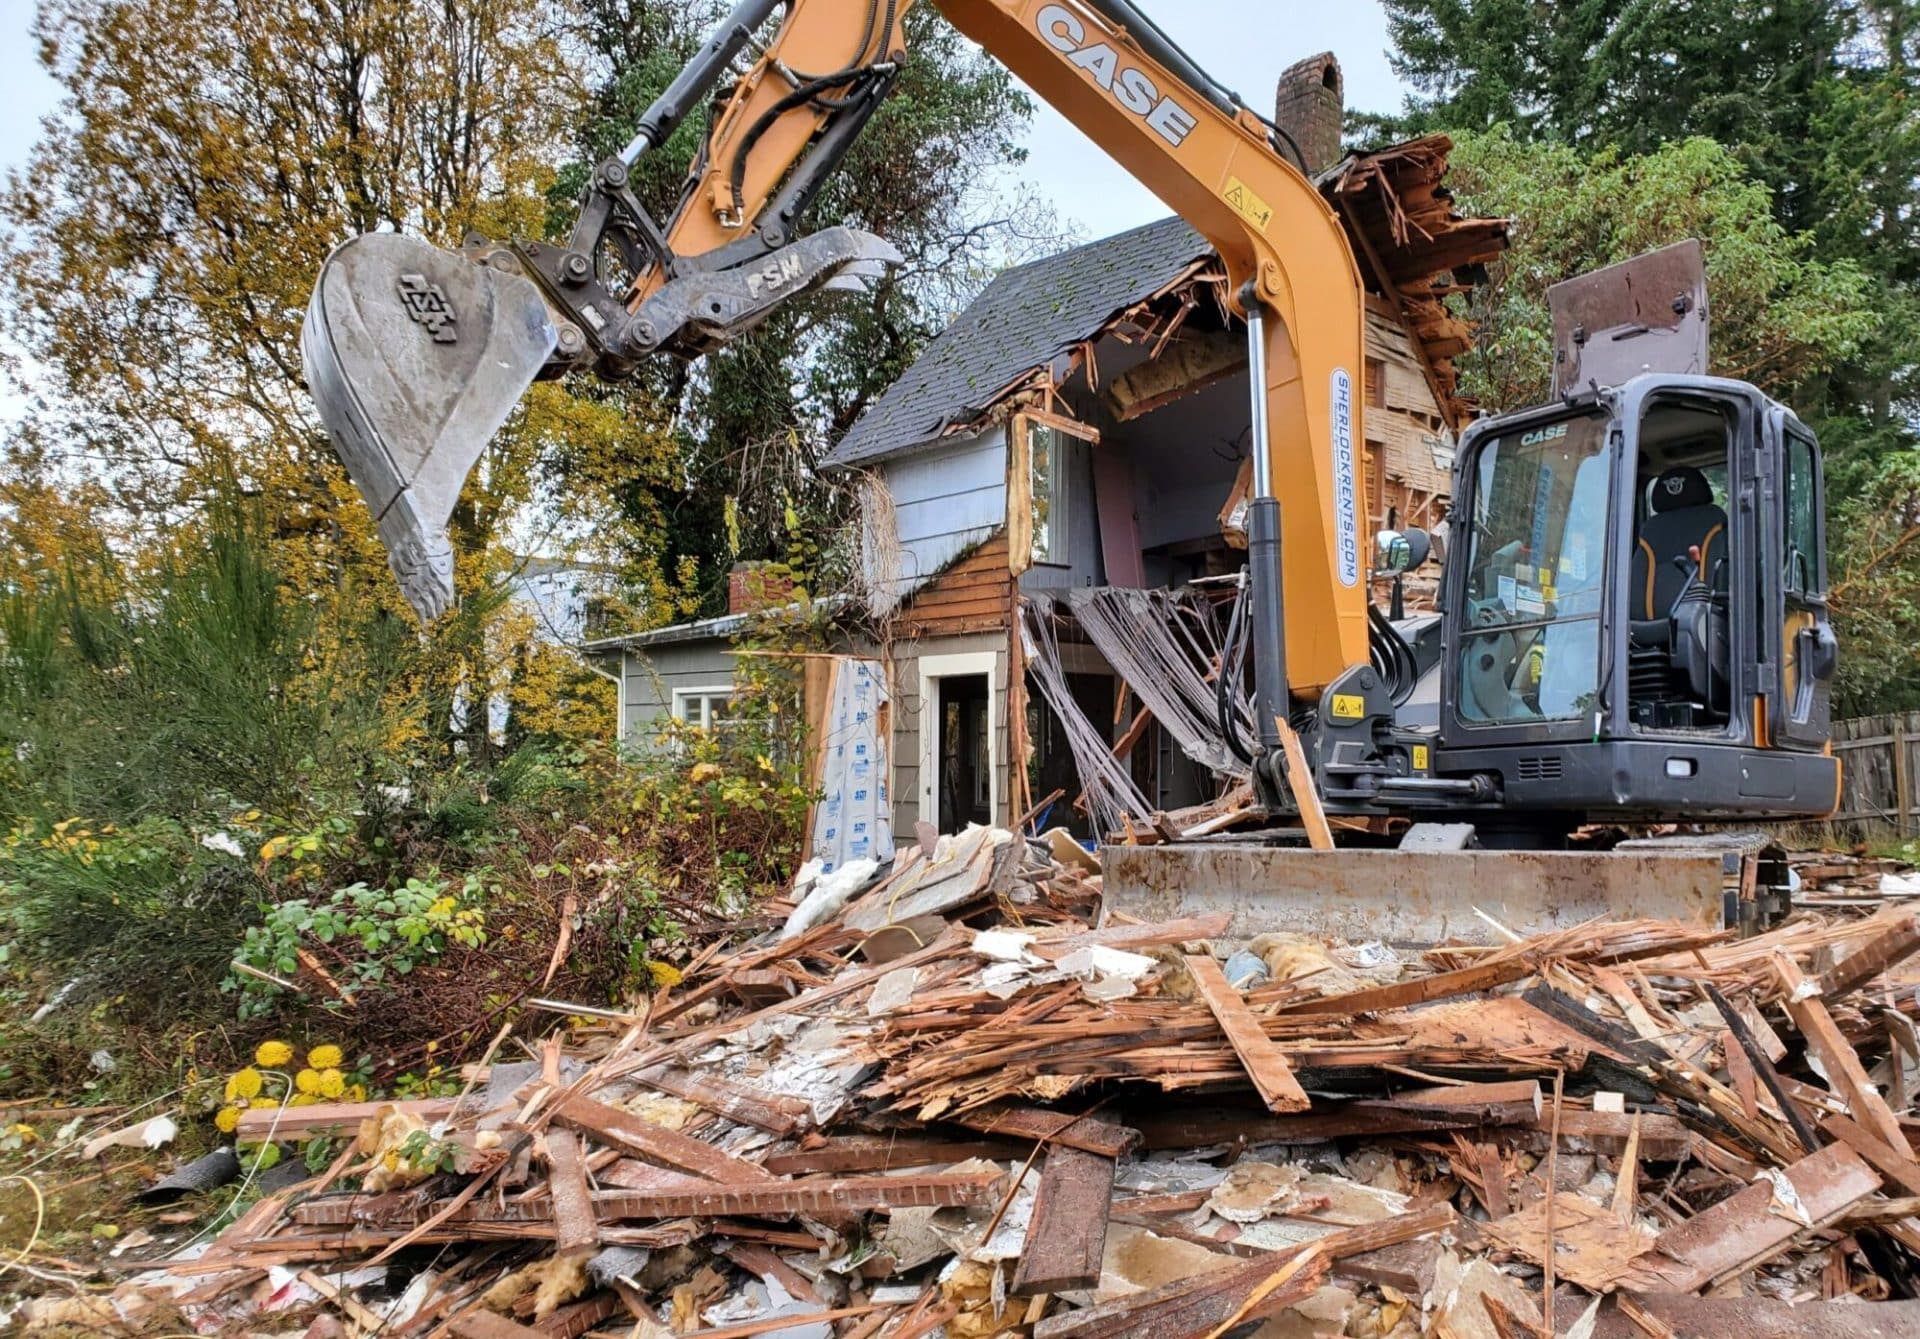 Here are a handful of reasons people are choosing demolition services